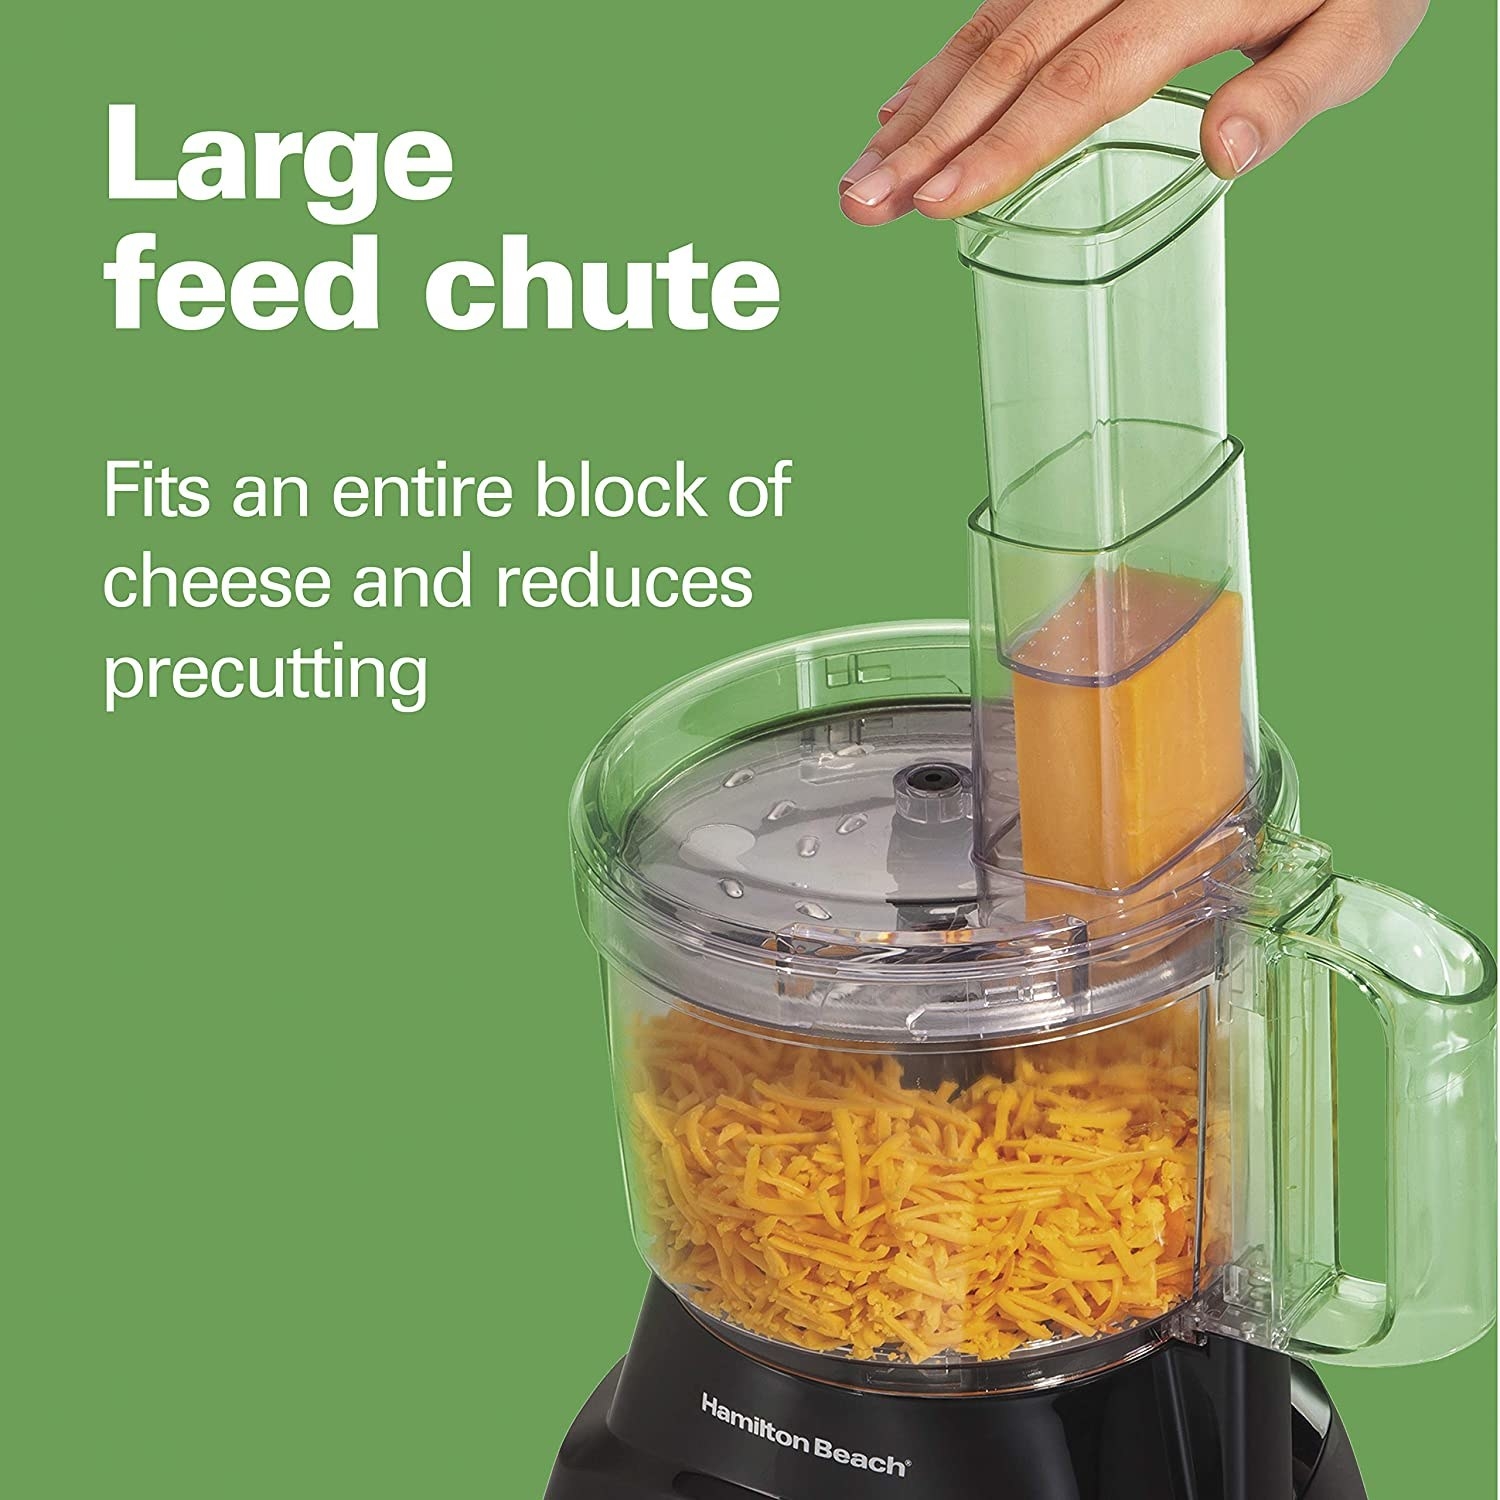 The food processor, which has a large feed chute that can fit an entire block of cheese